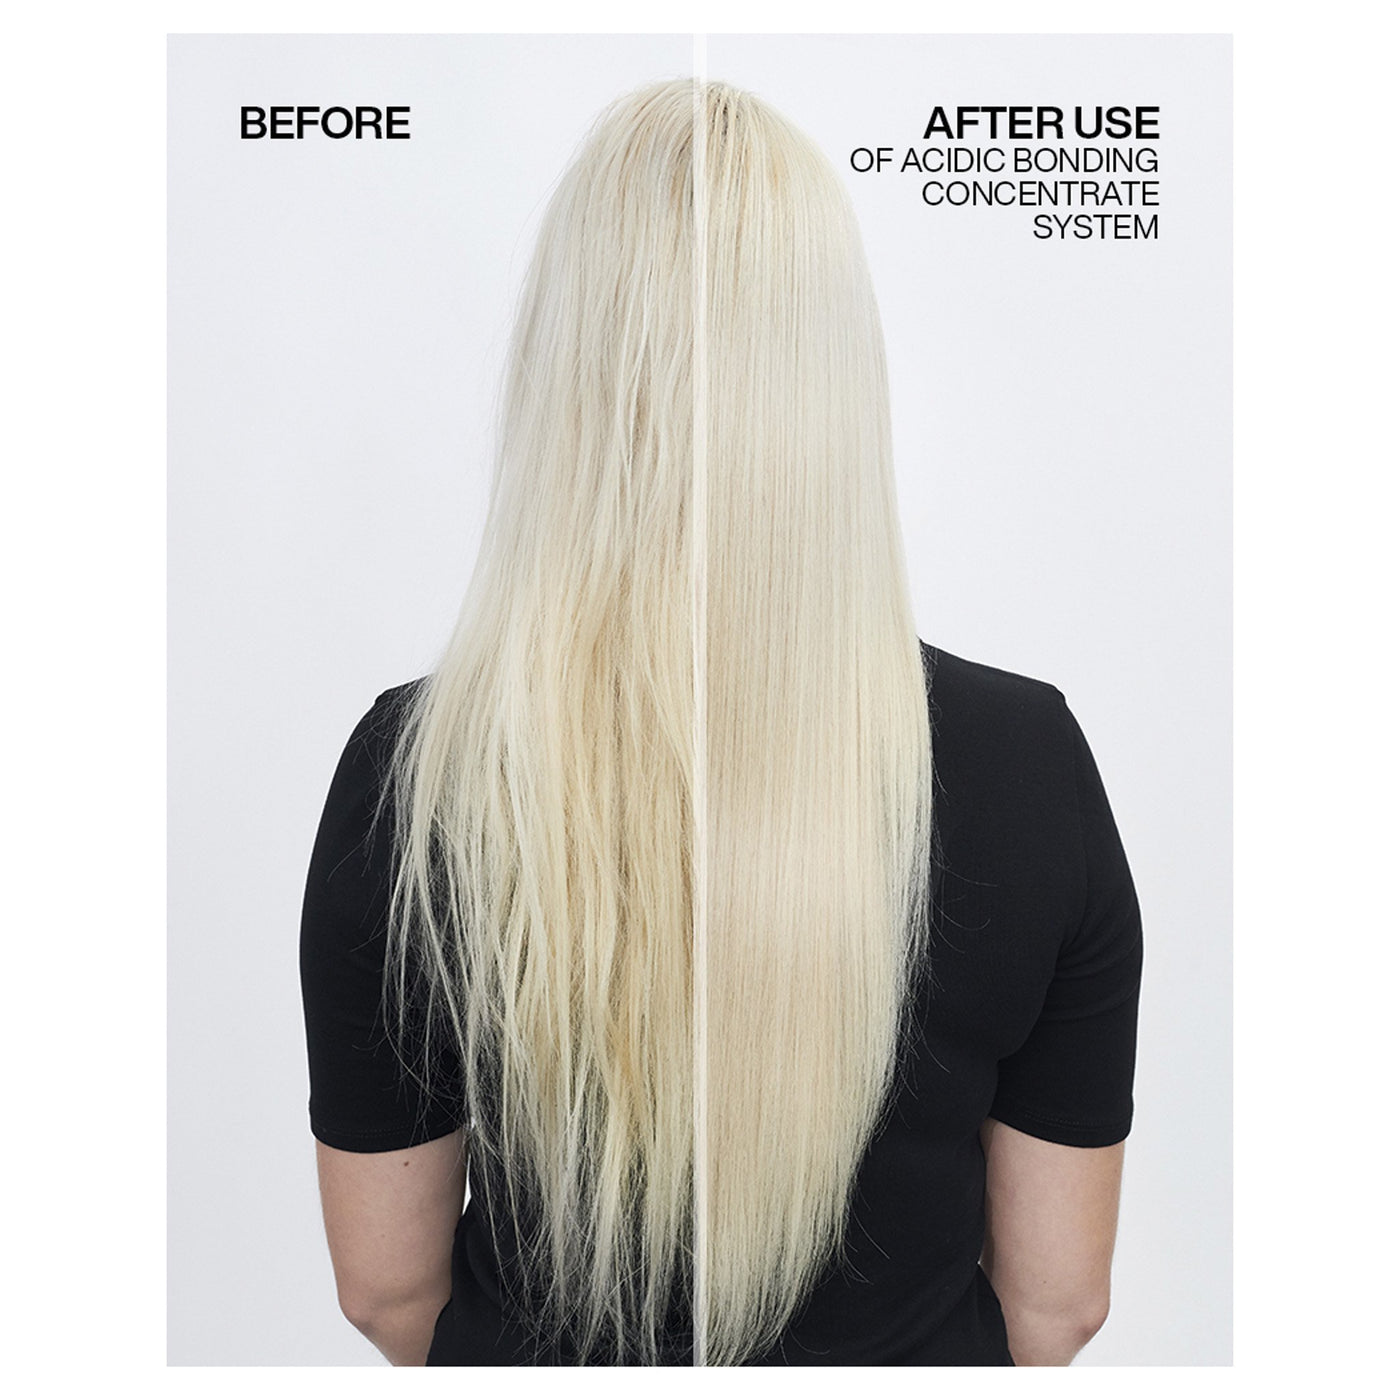 Redken Acidic Bonding Concentrate Shampoo (1000ml) before and after using product on blonde hair